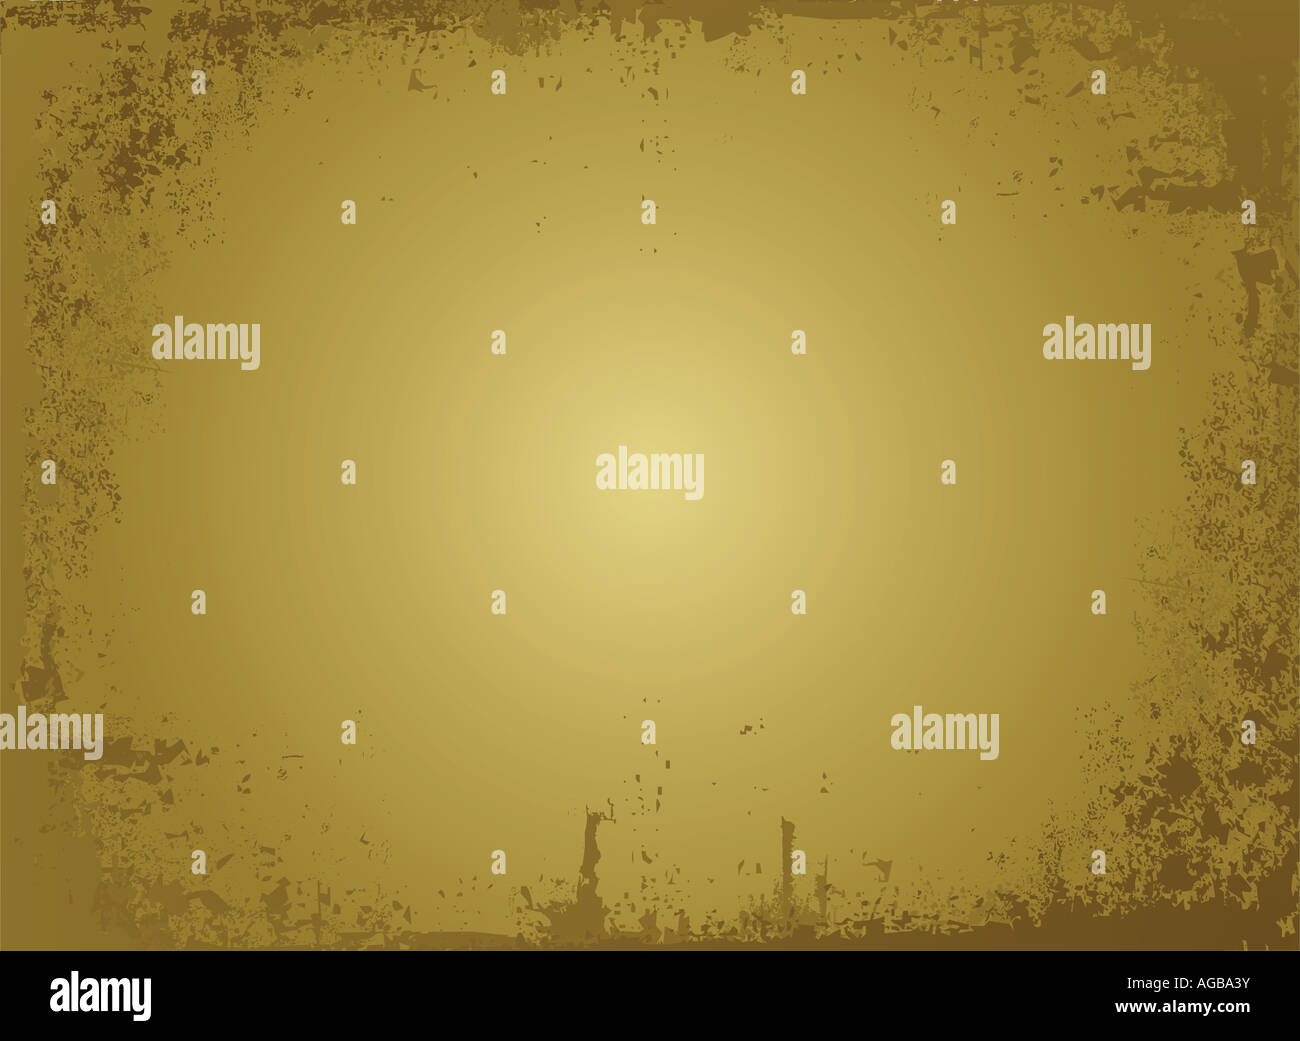 Illustrated background of a sheet of golden parchment ideal to place text over Stock Photo